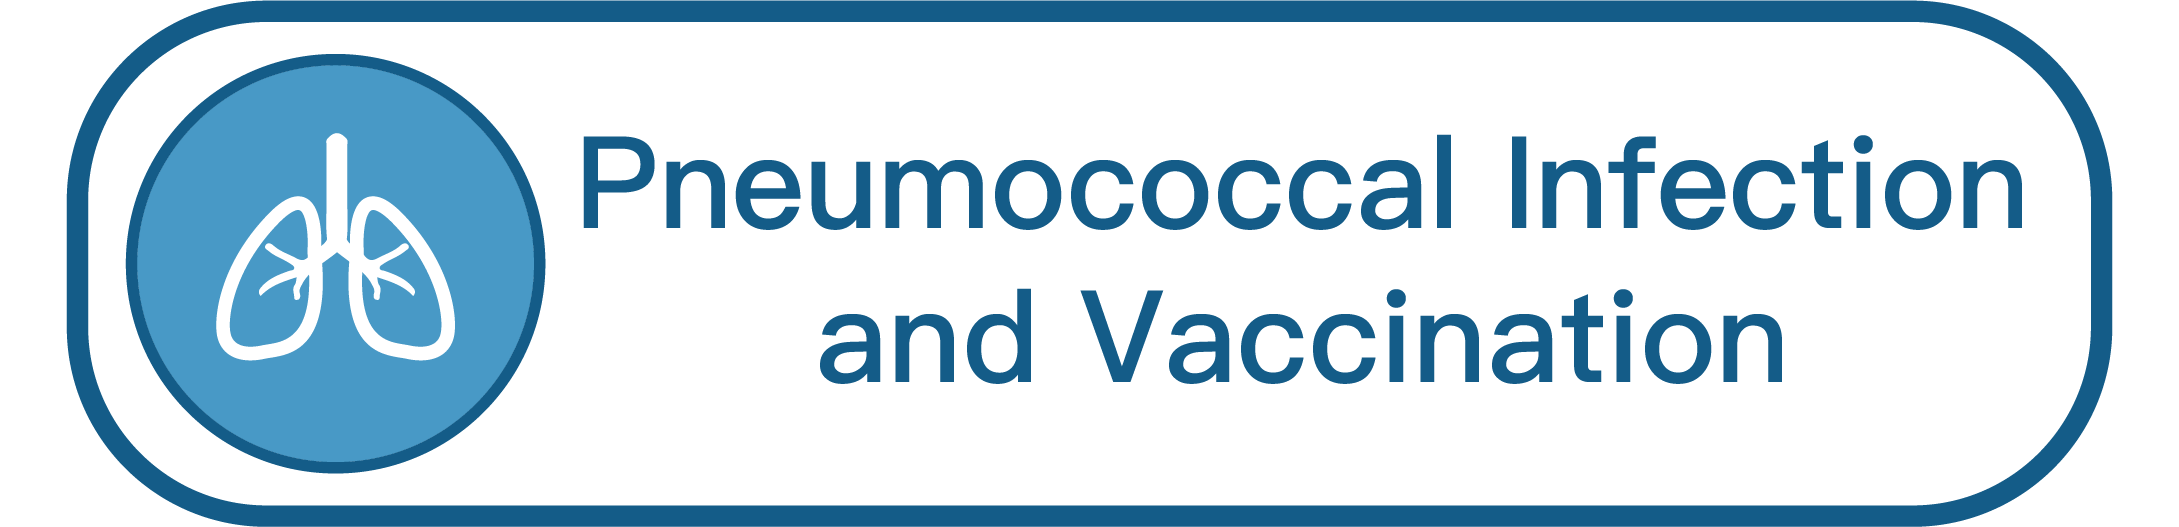 Pneumococcal Infection and Vaccination